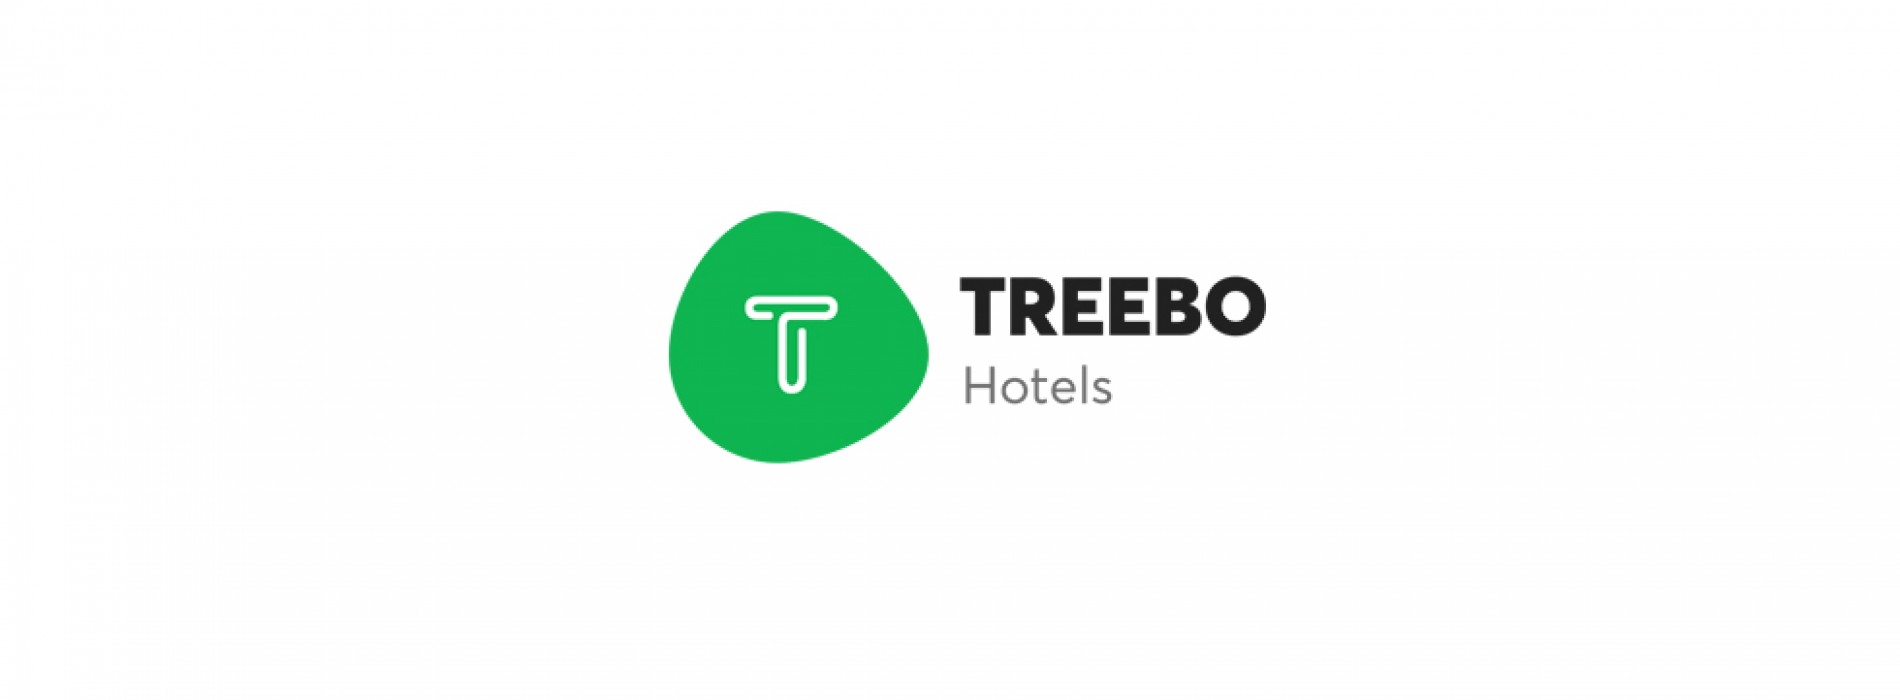 Treebo launches ‘InstaConnect Wi-Fi’ for guests at its hotels